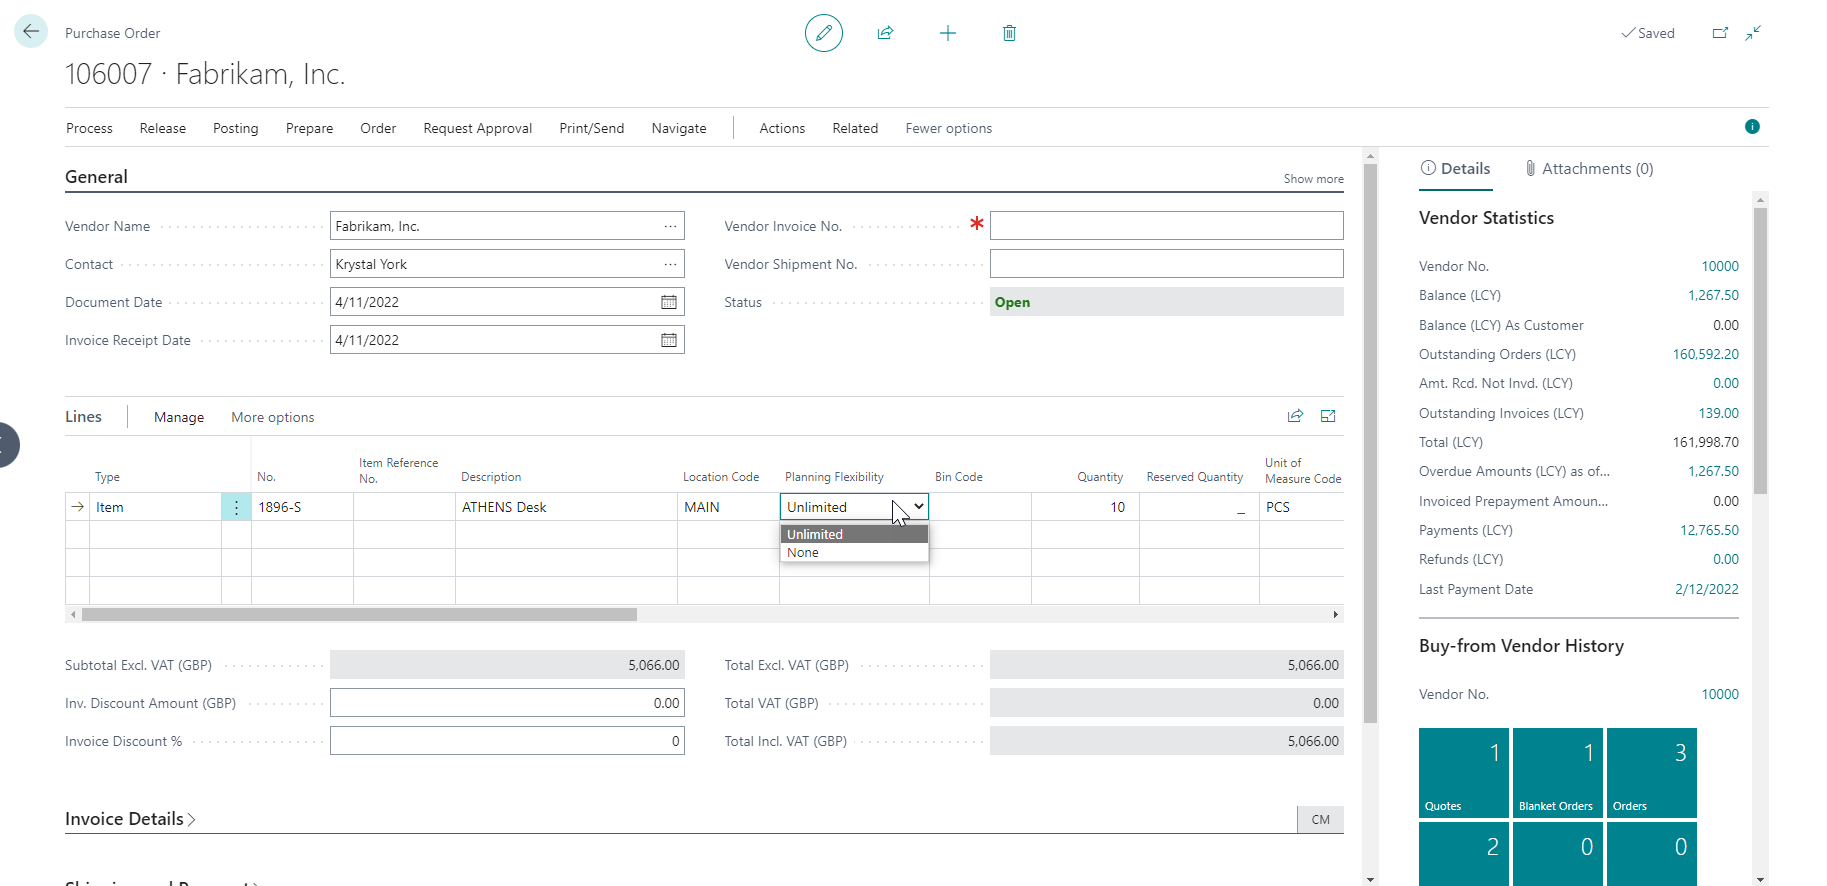 Screenshot of Planning Flexibility field on the Purchase Order.